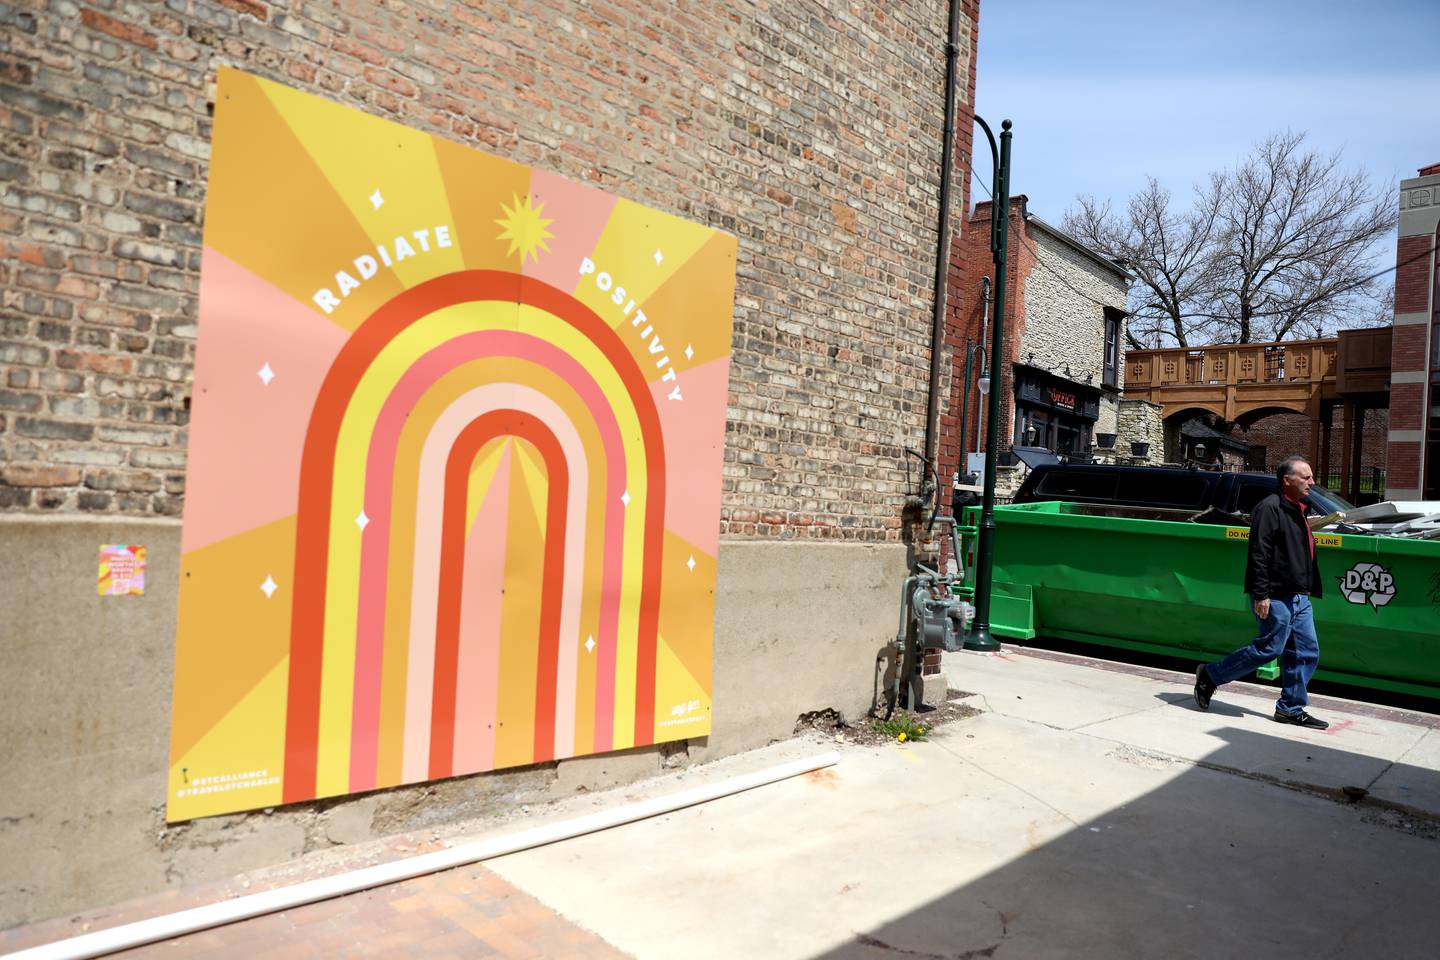 Radiate Positivity mural at 7 S. 2nd Ave. Five new murals were created by the St. Charles Business Alliance and New York artist Steffi Lynn and installed throughout Downtown St. Charles.